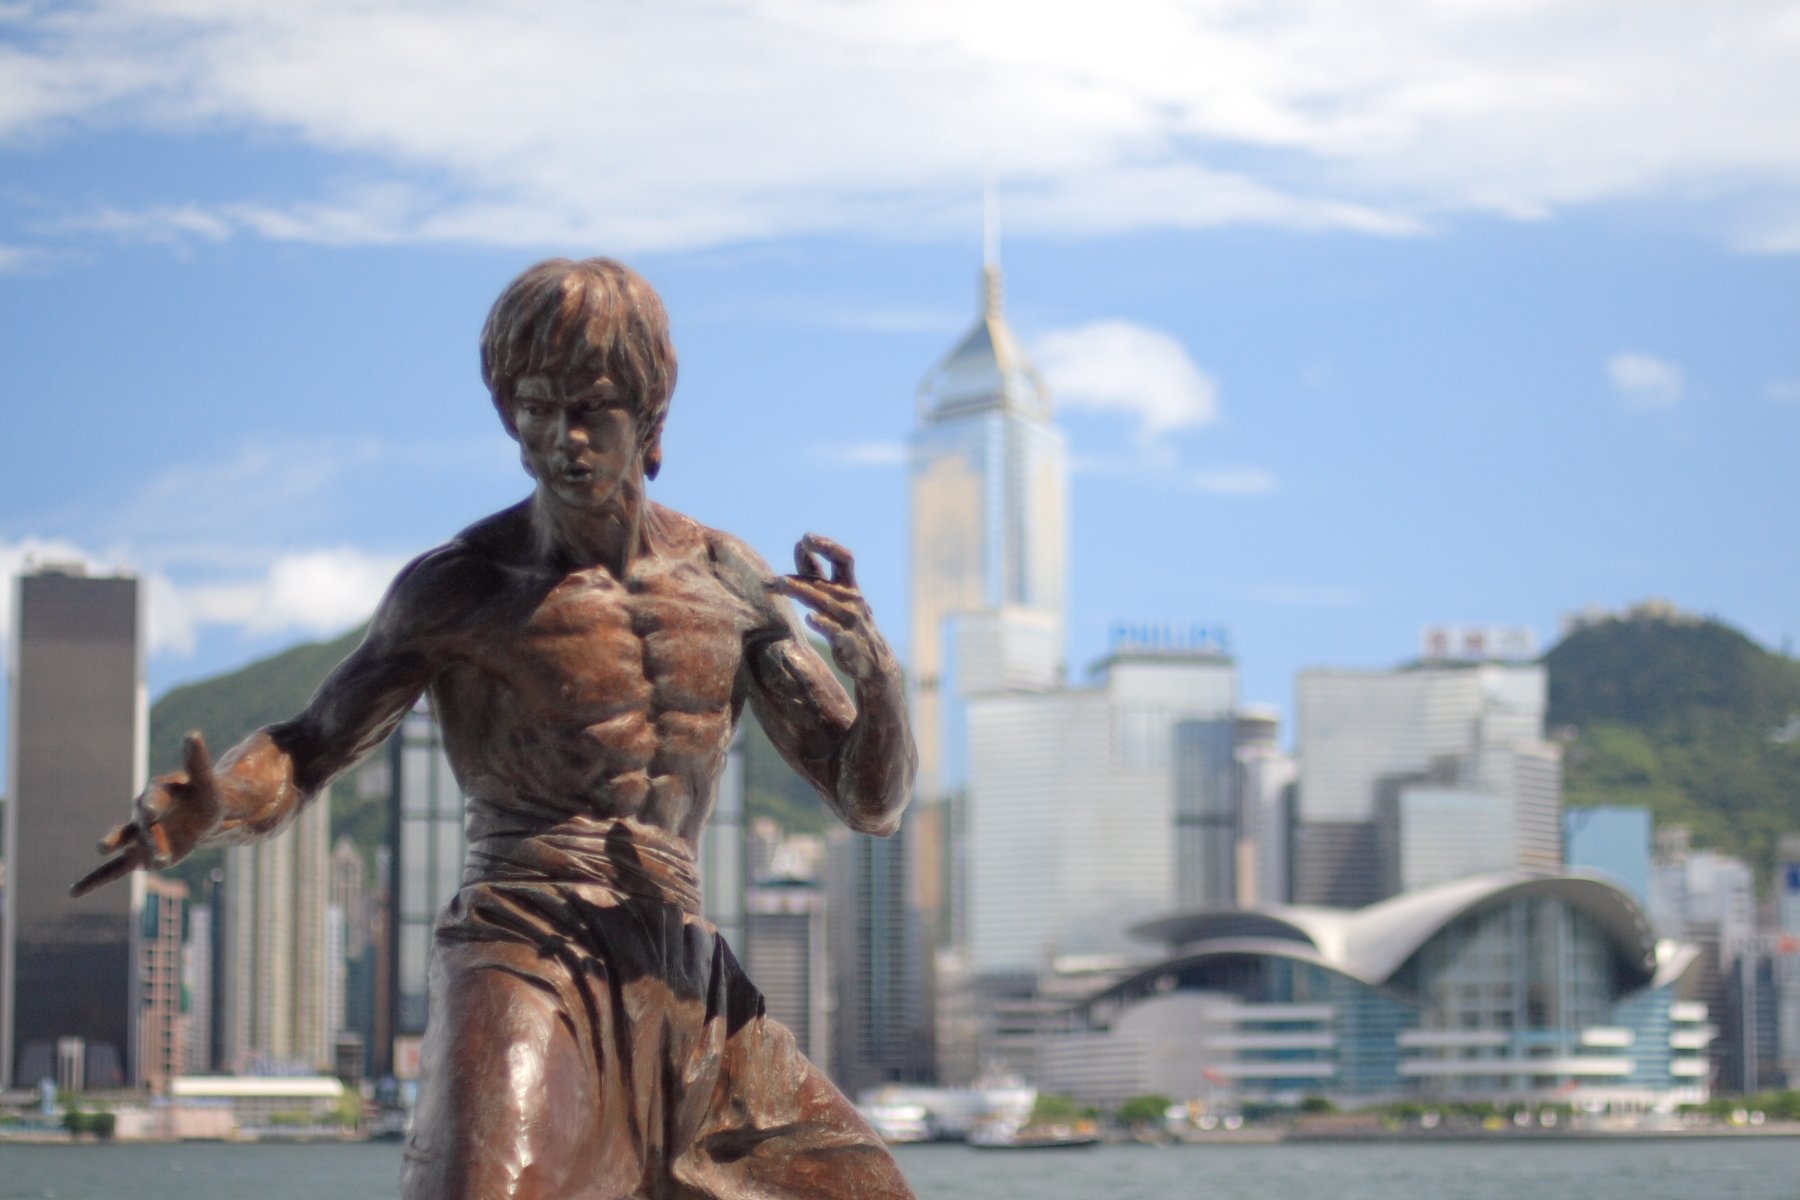 ICYMI - Happy 75th birthday Bruce Lee! Here are 75 obscure facts about the Hong Kong icon  